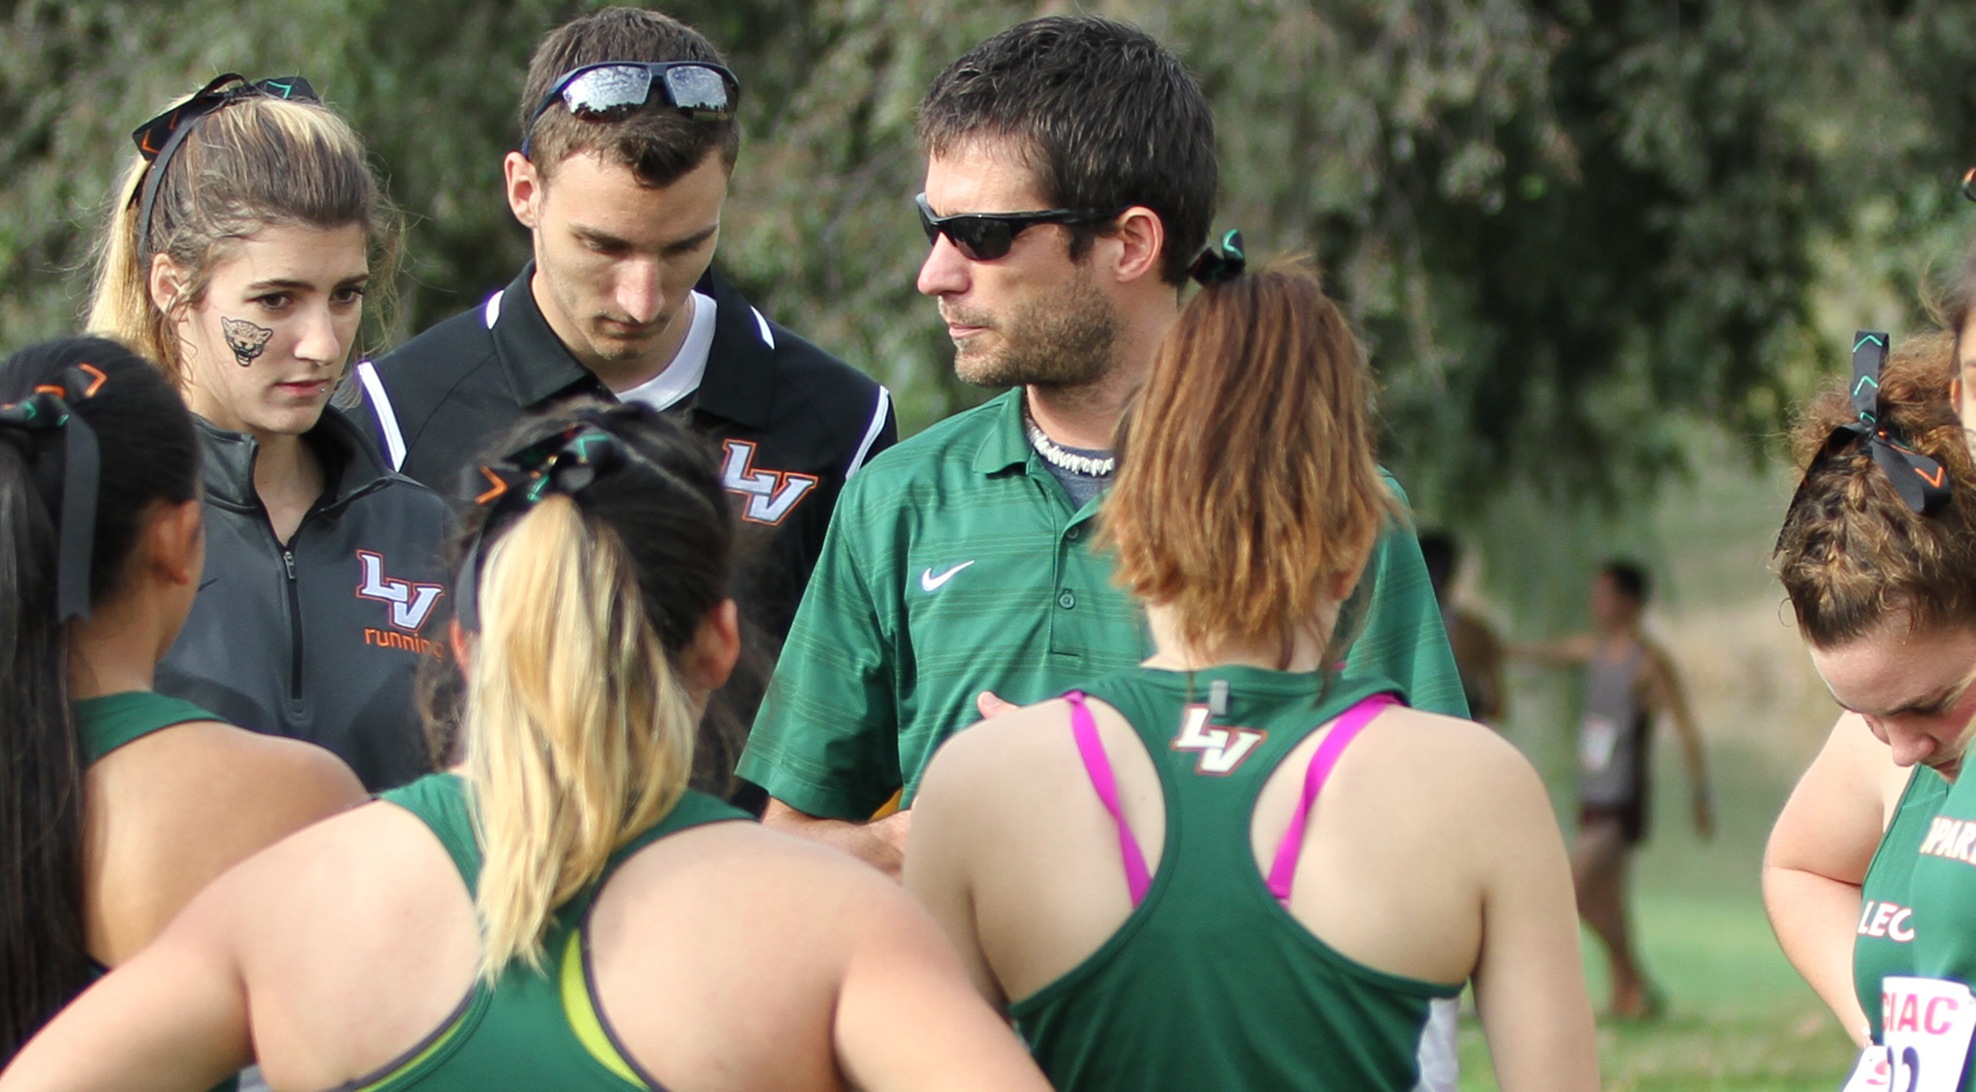 George steps down as cross country head coach